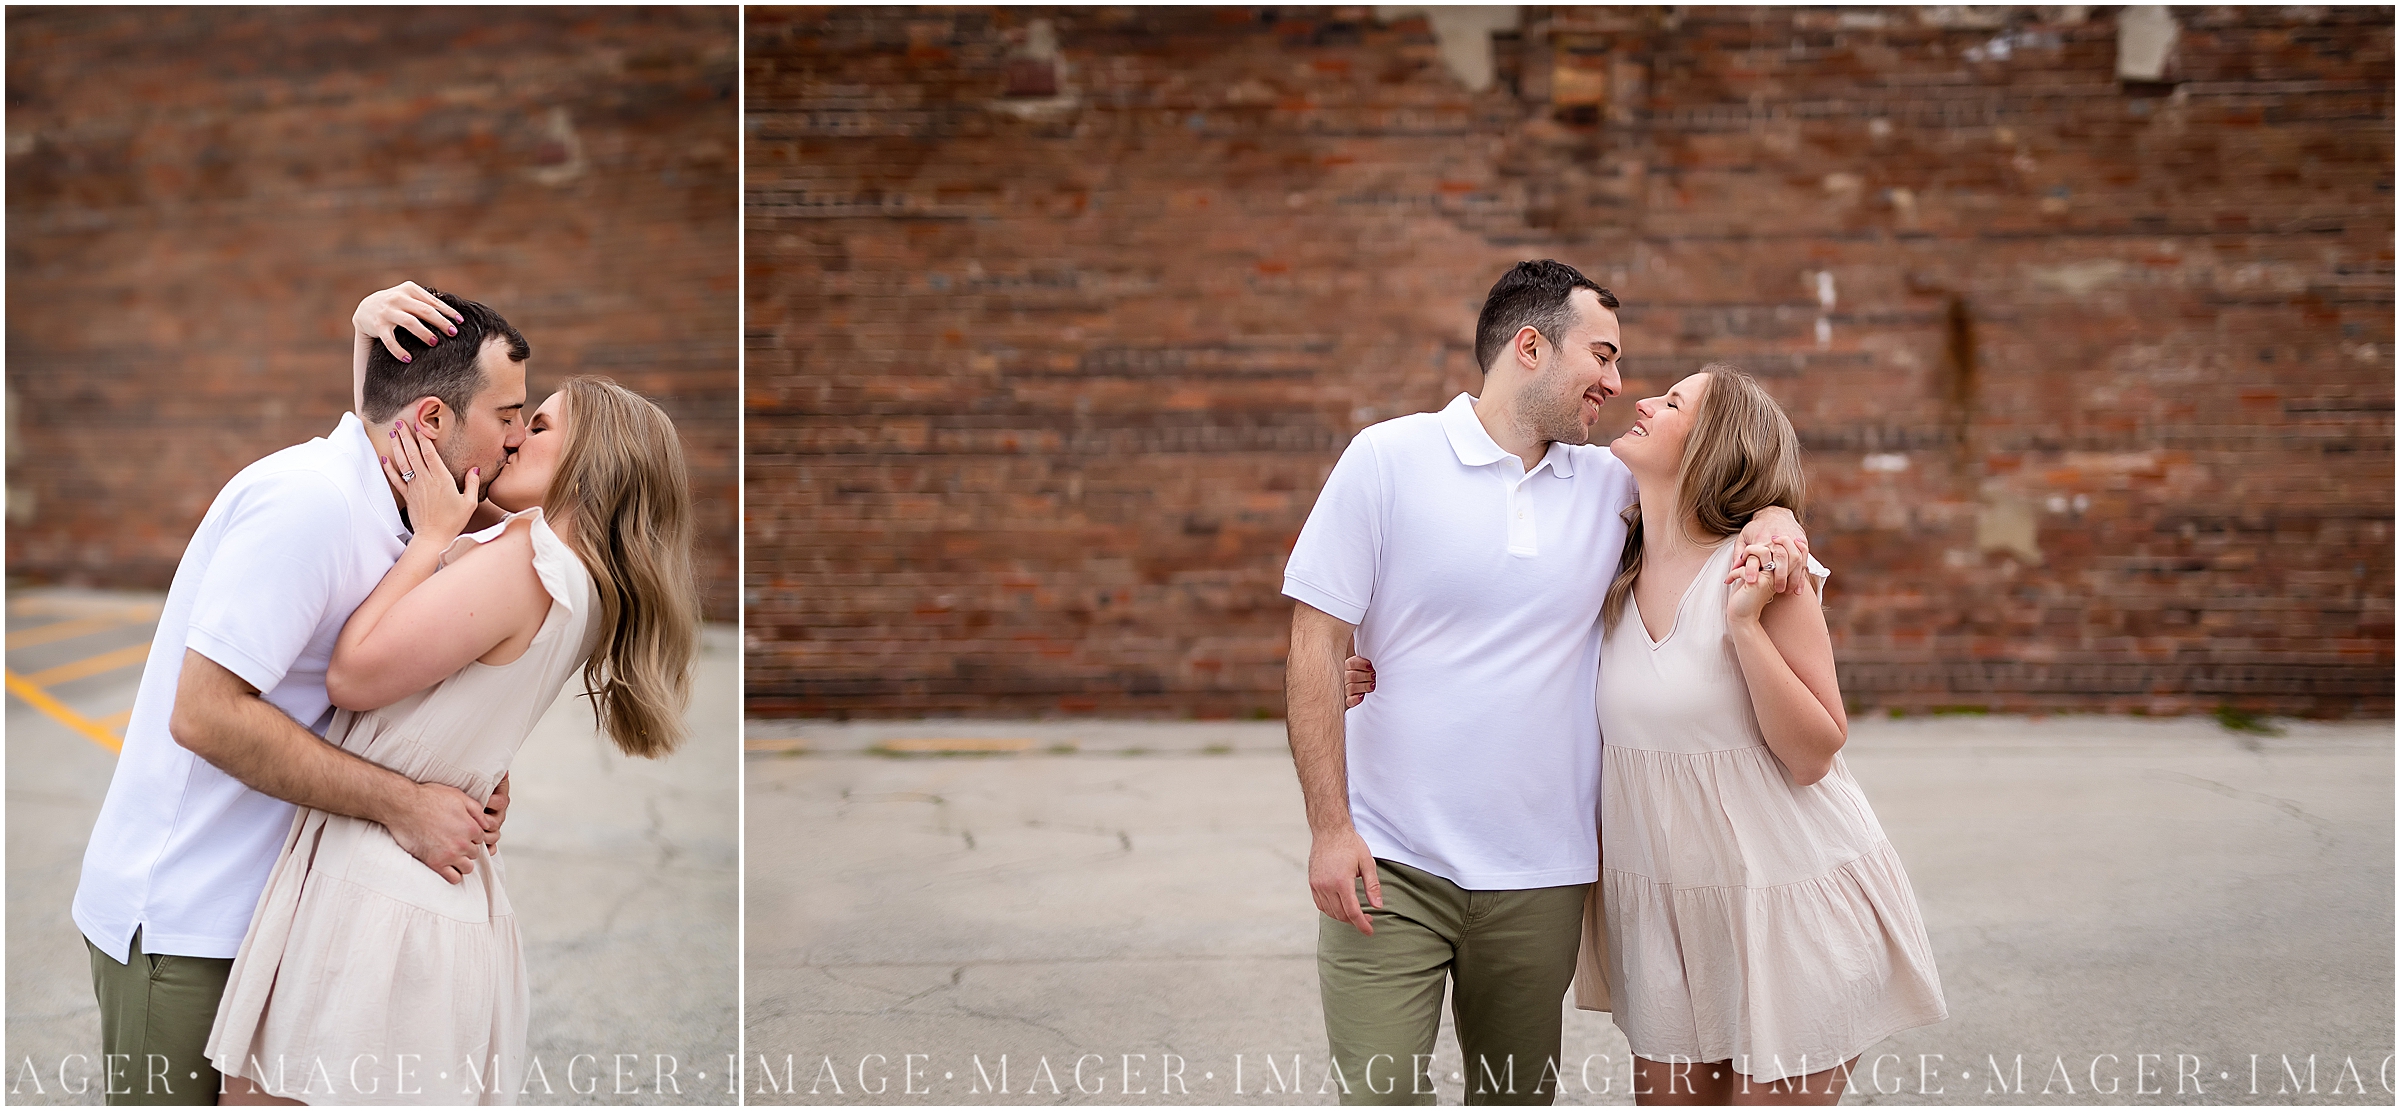 A couple kisses in front a brick wall in downtown Danville, IL. 

Photo taken by Mager Image Photography 